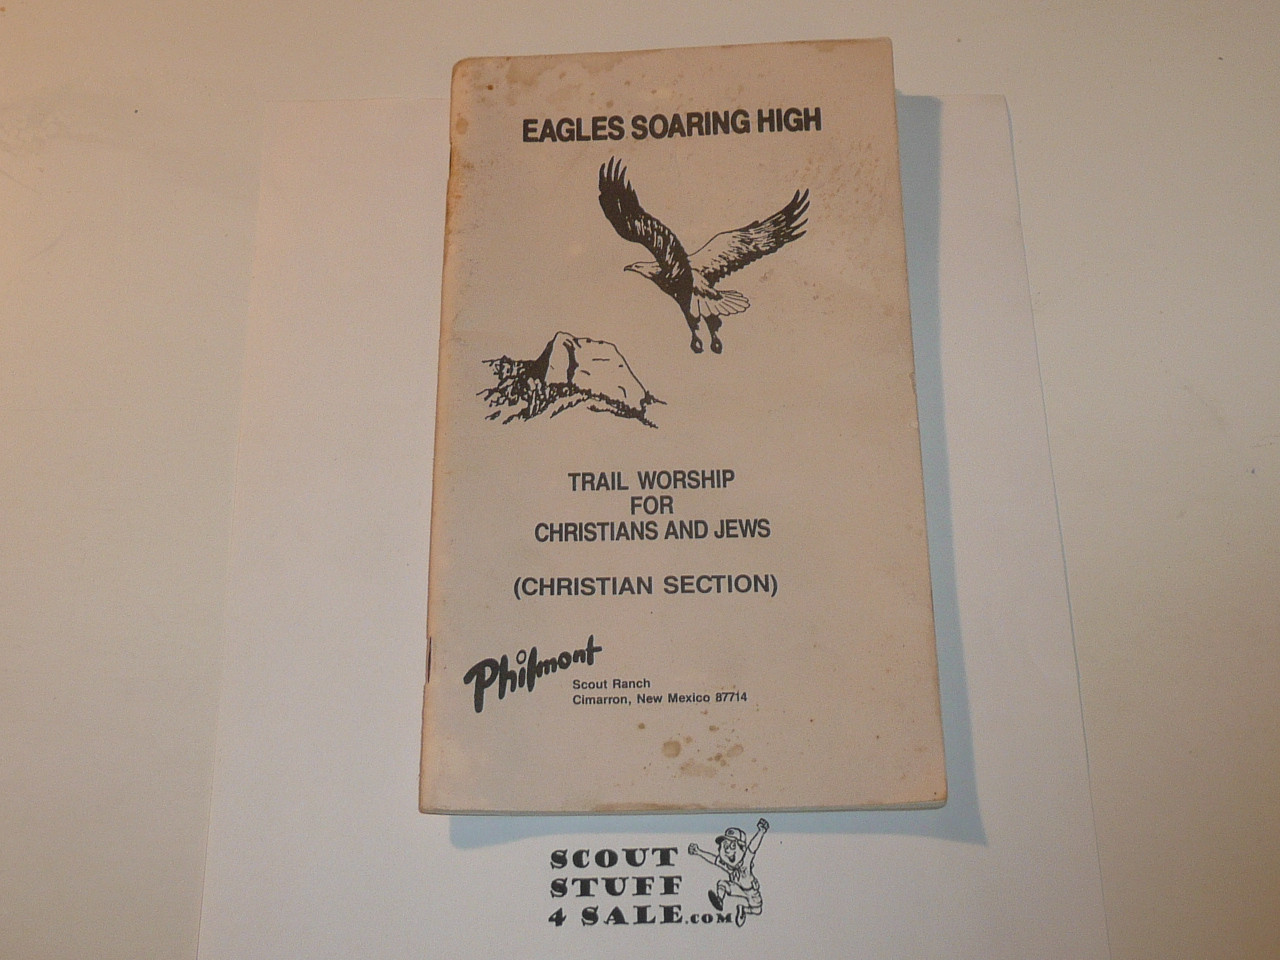 1976 Eagles Soaring High, Philmont Religious Service Guide